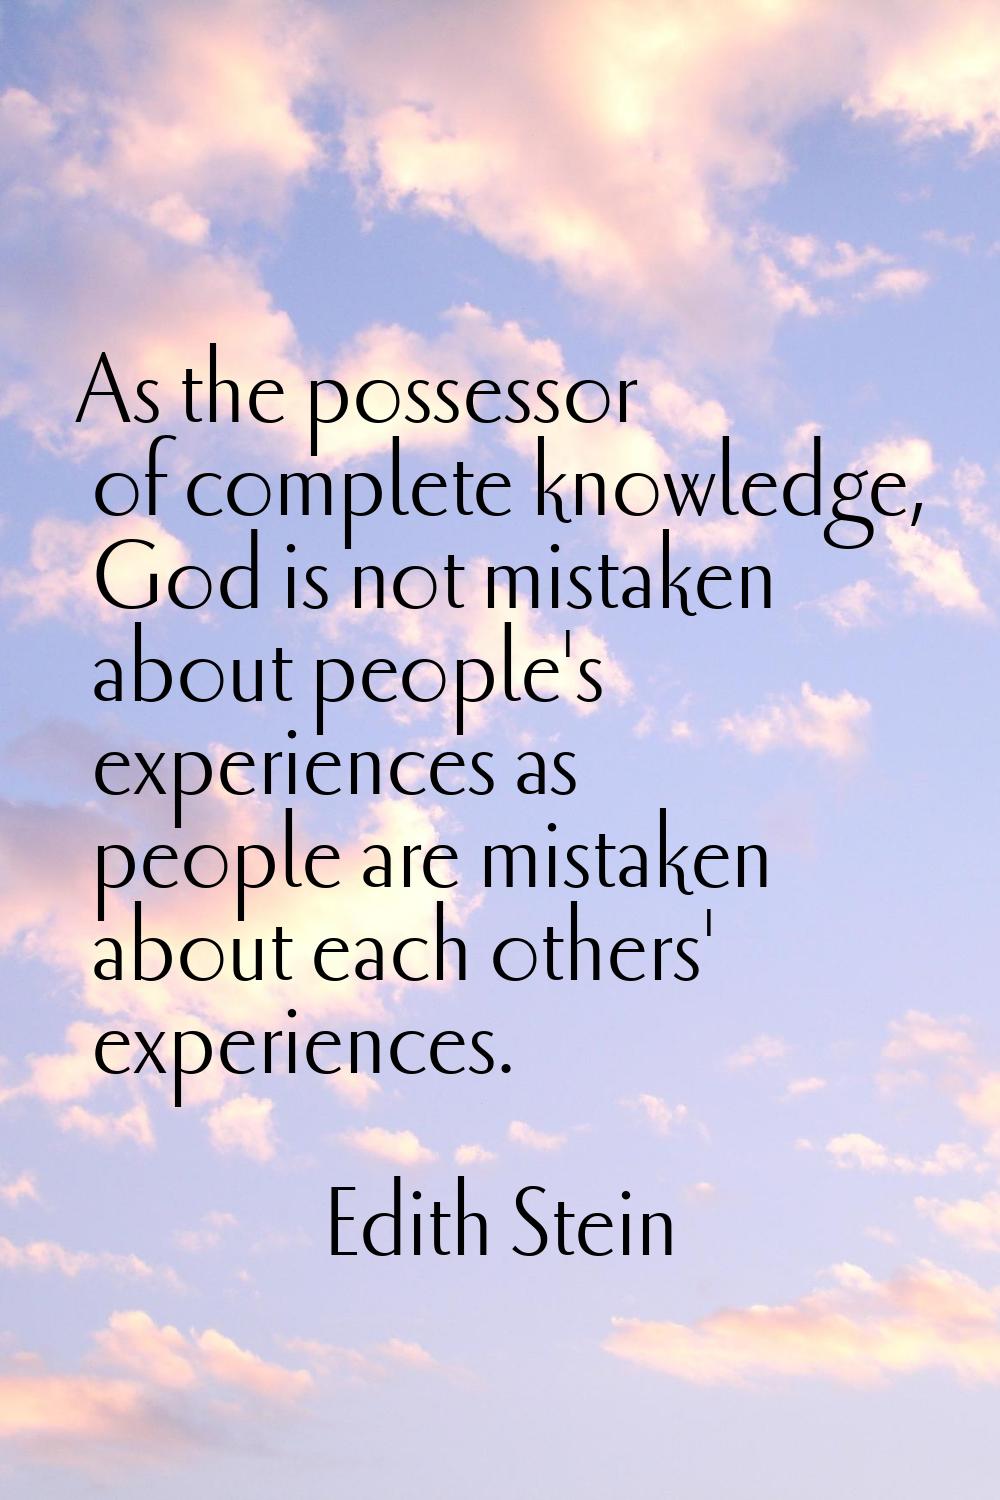 As the possessor of complete knowledge, God is not mistaken about people's experiences as people ar